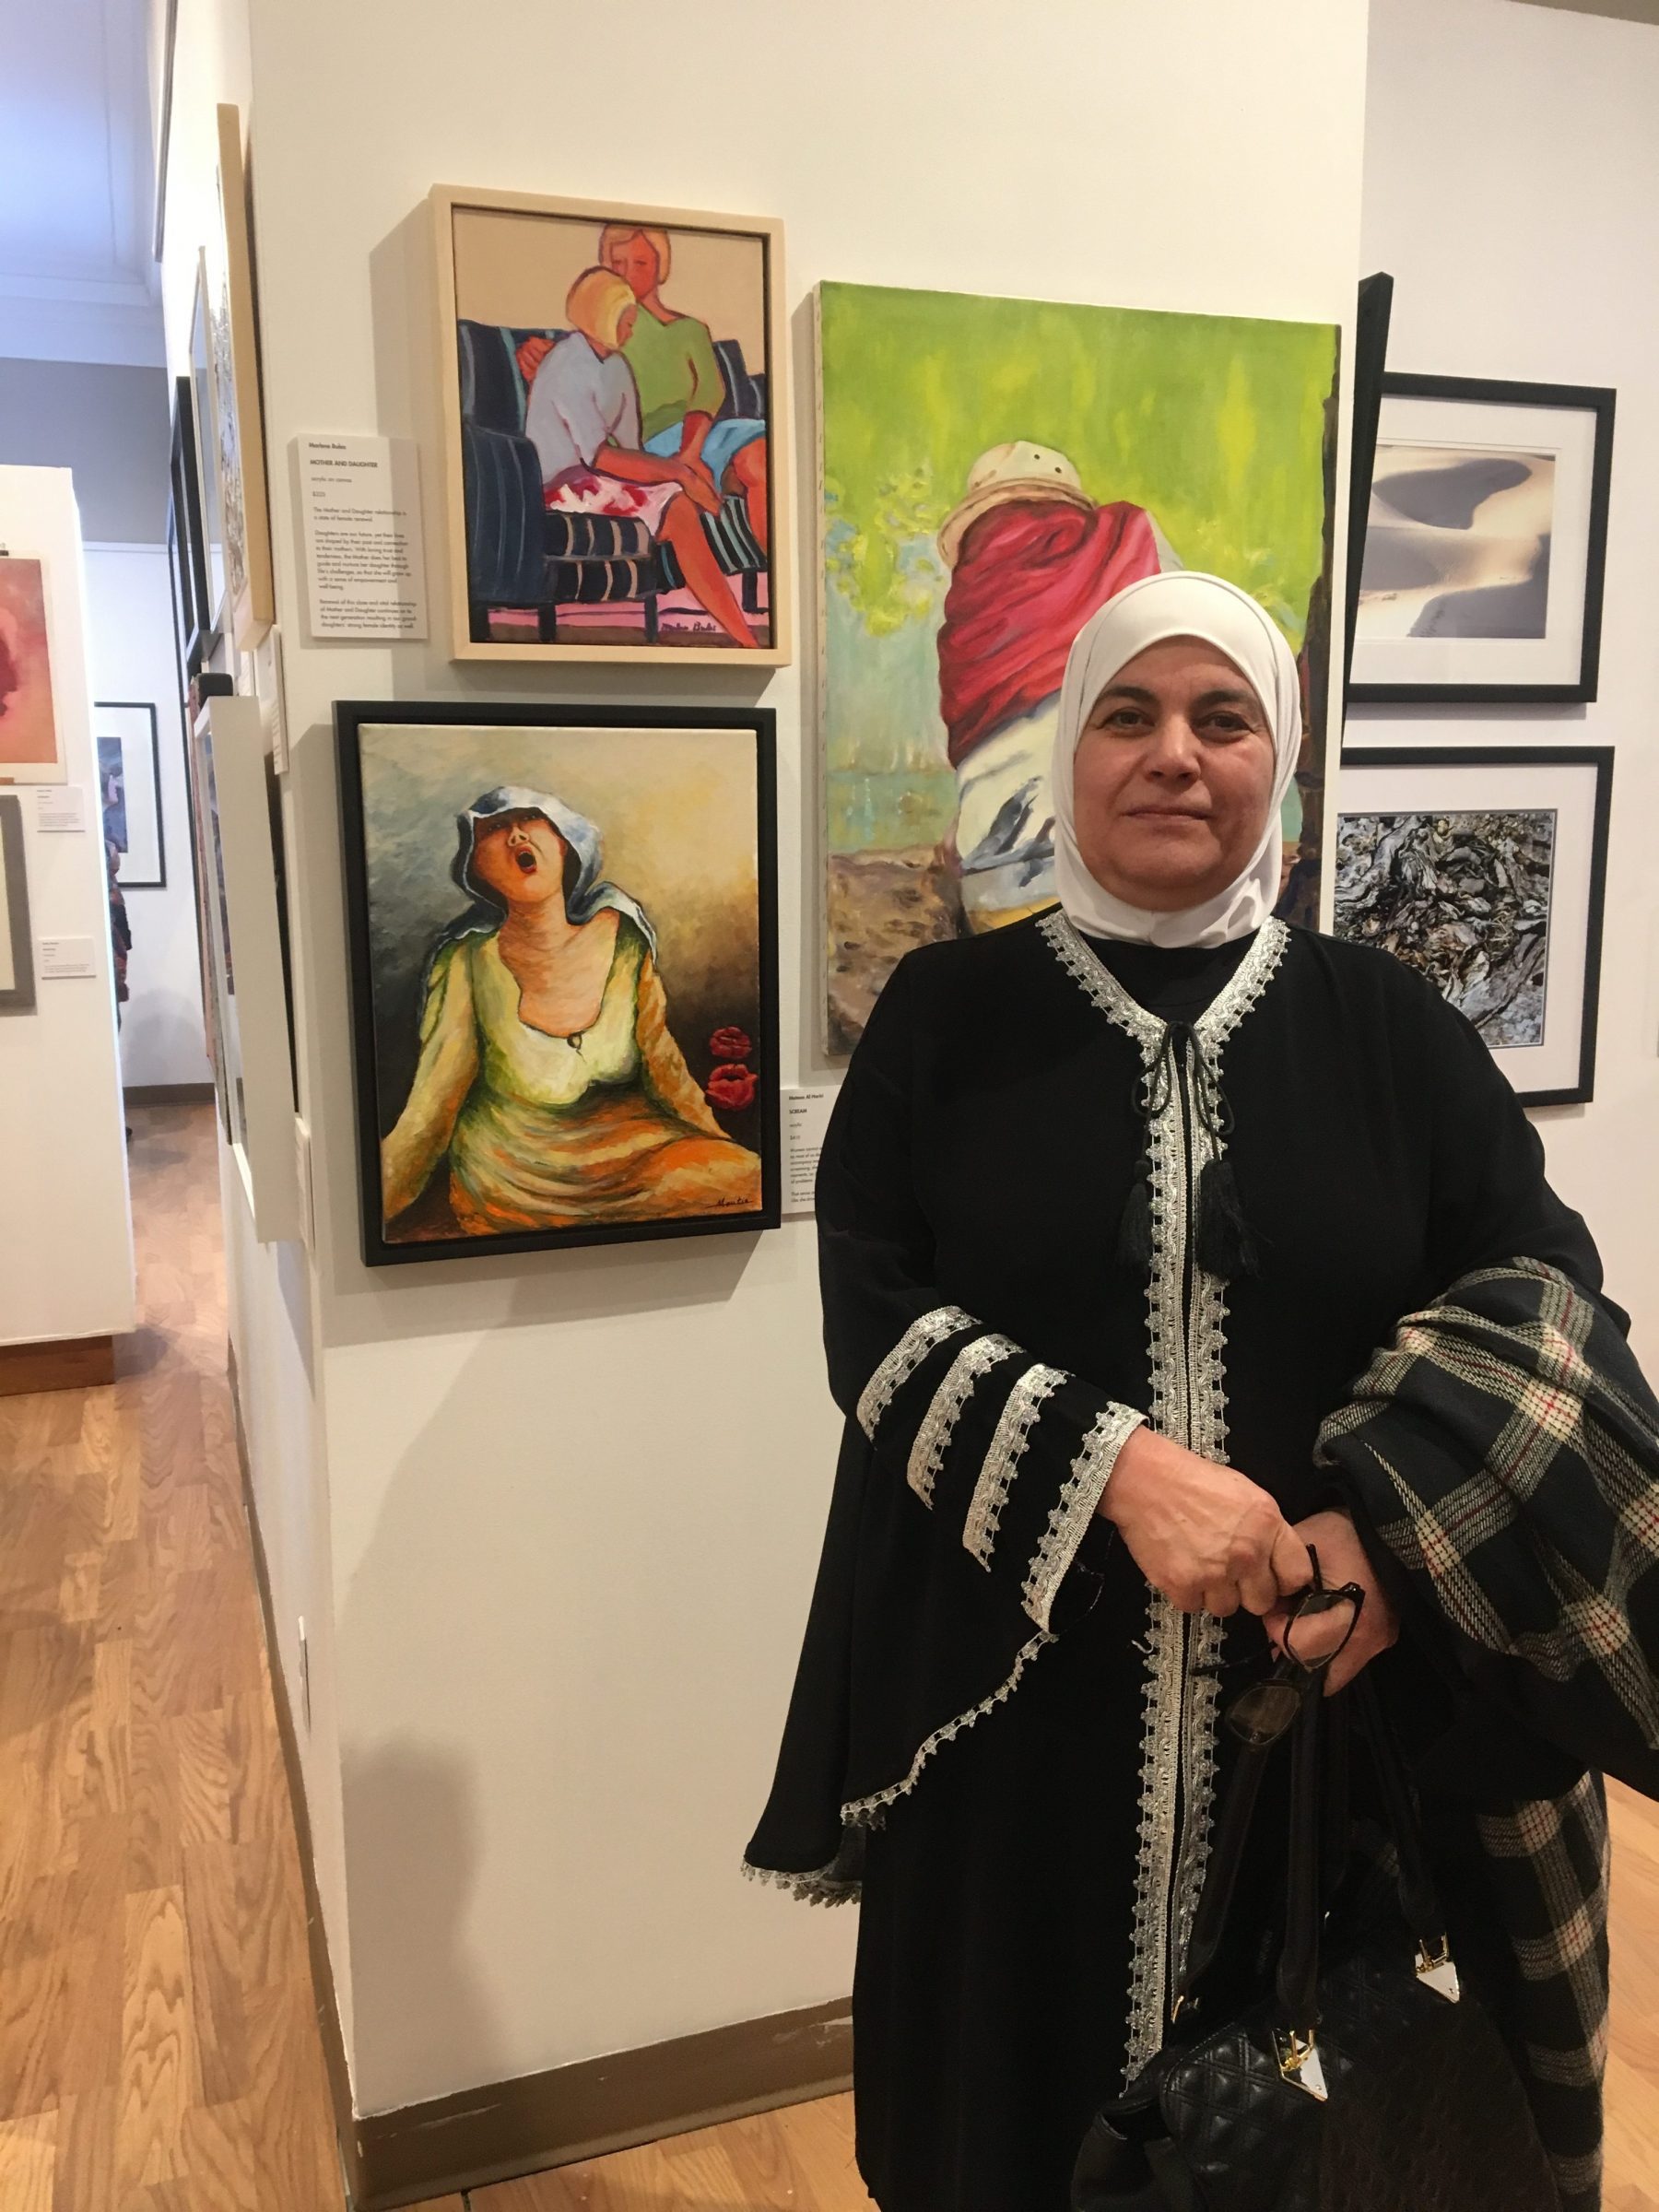 Syrian Mother & Daughter Connect to Their Lost Home Through Art